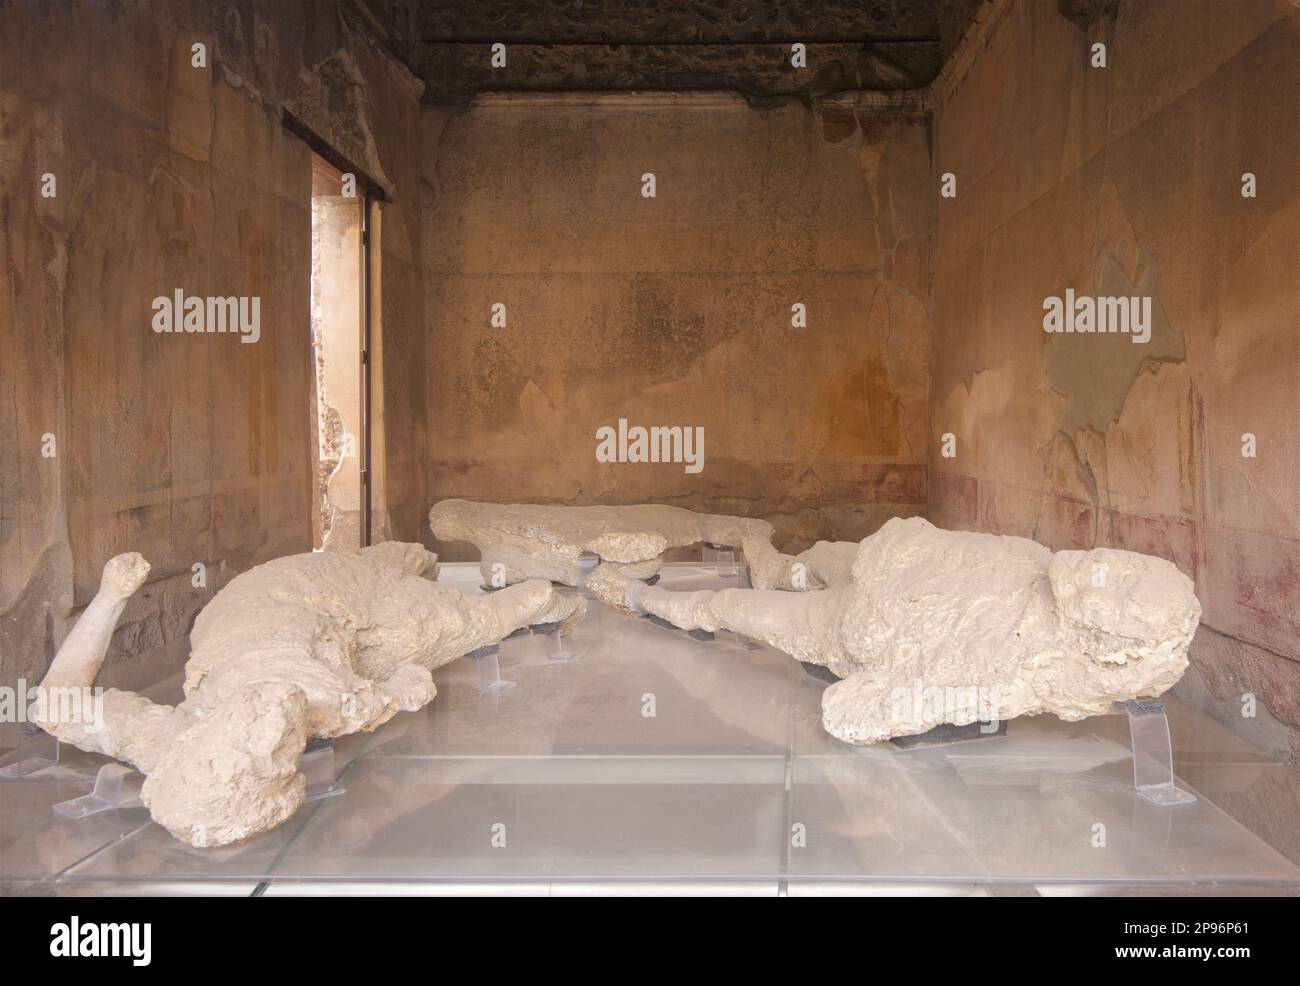 Plaster-encapsulated bodies of a slave and his owner on display at a house in Pompeii.  Pompeii was buried under meters of ash and pumice after the catastrophic eruption of Mount Vesuvius in 79 A.D. The preserved site features excavated ruins of streets and houses that visitors can freely explore. Stock Photo